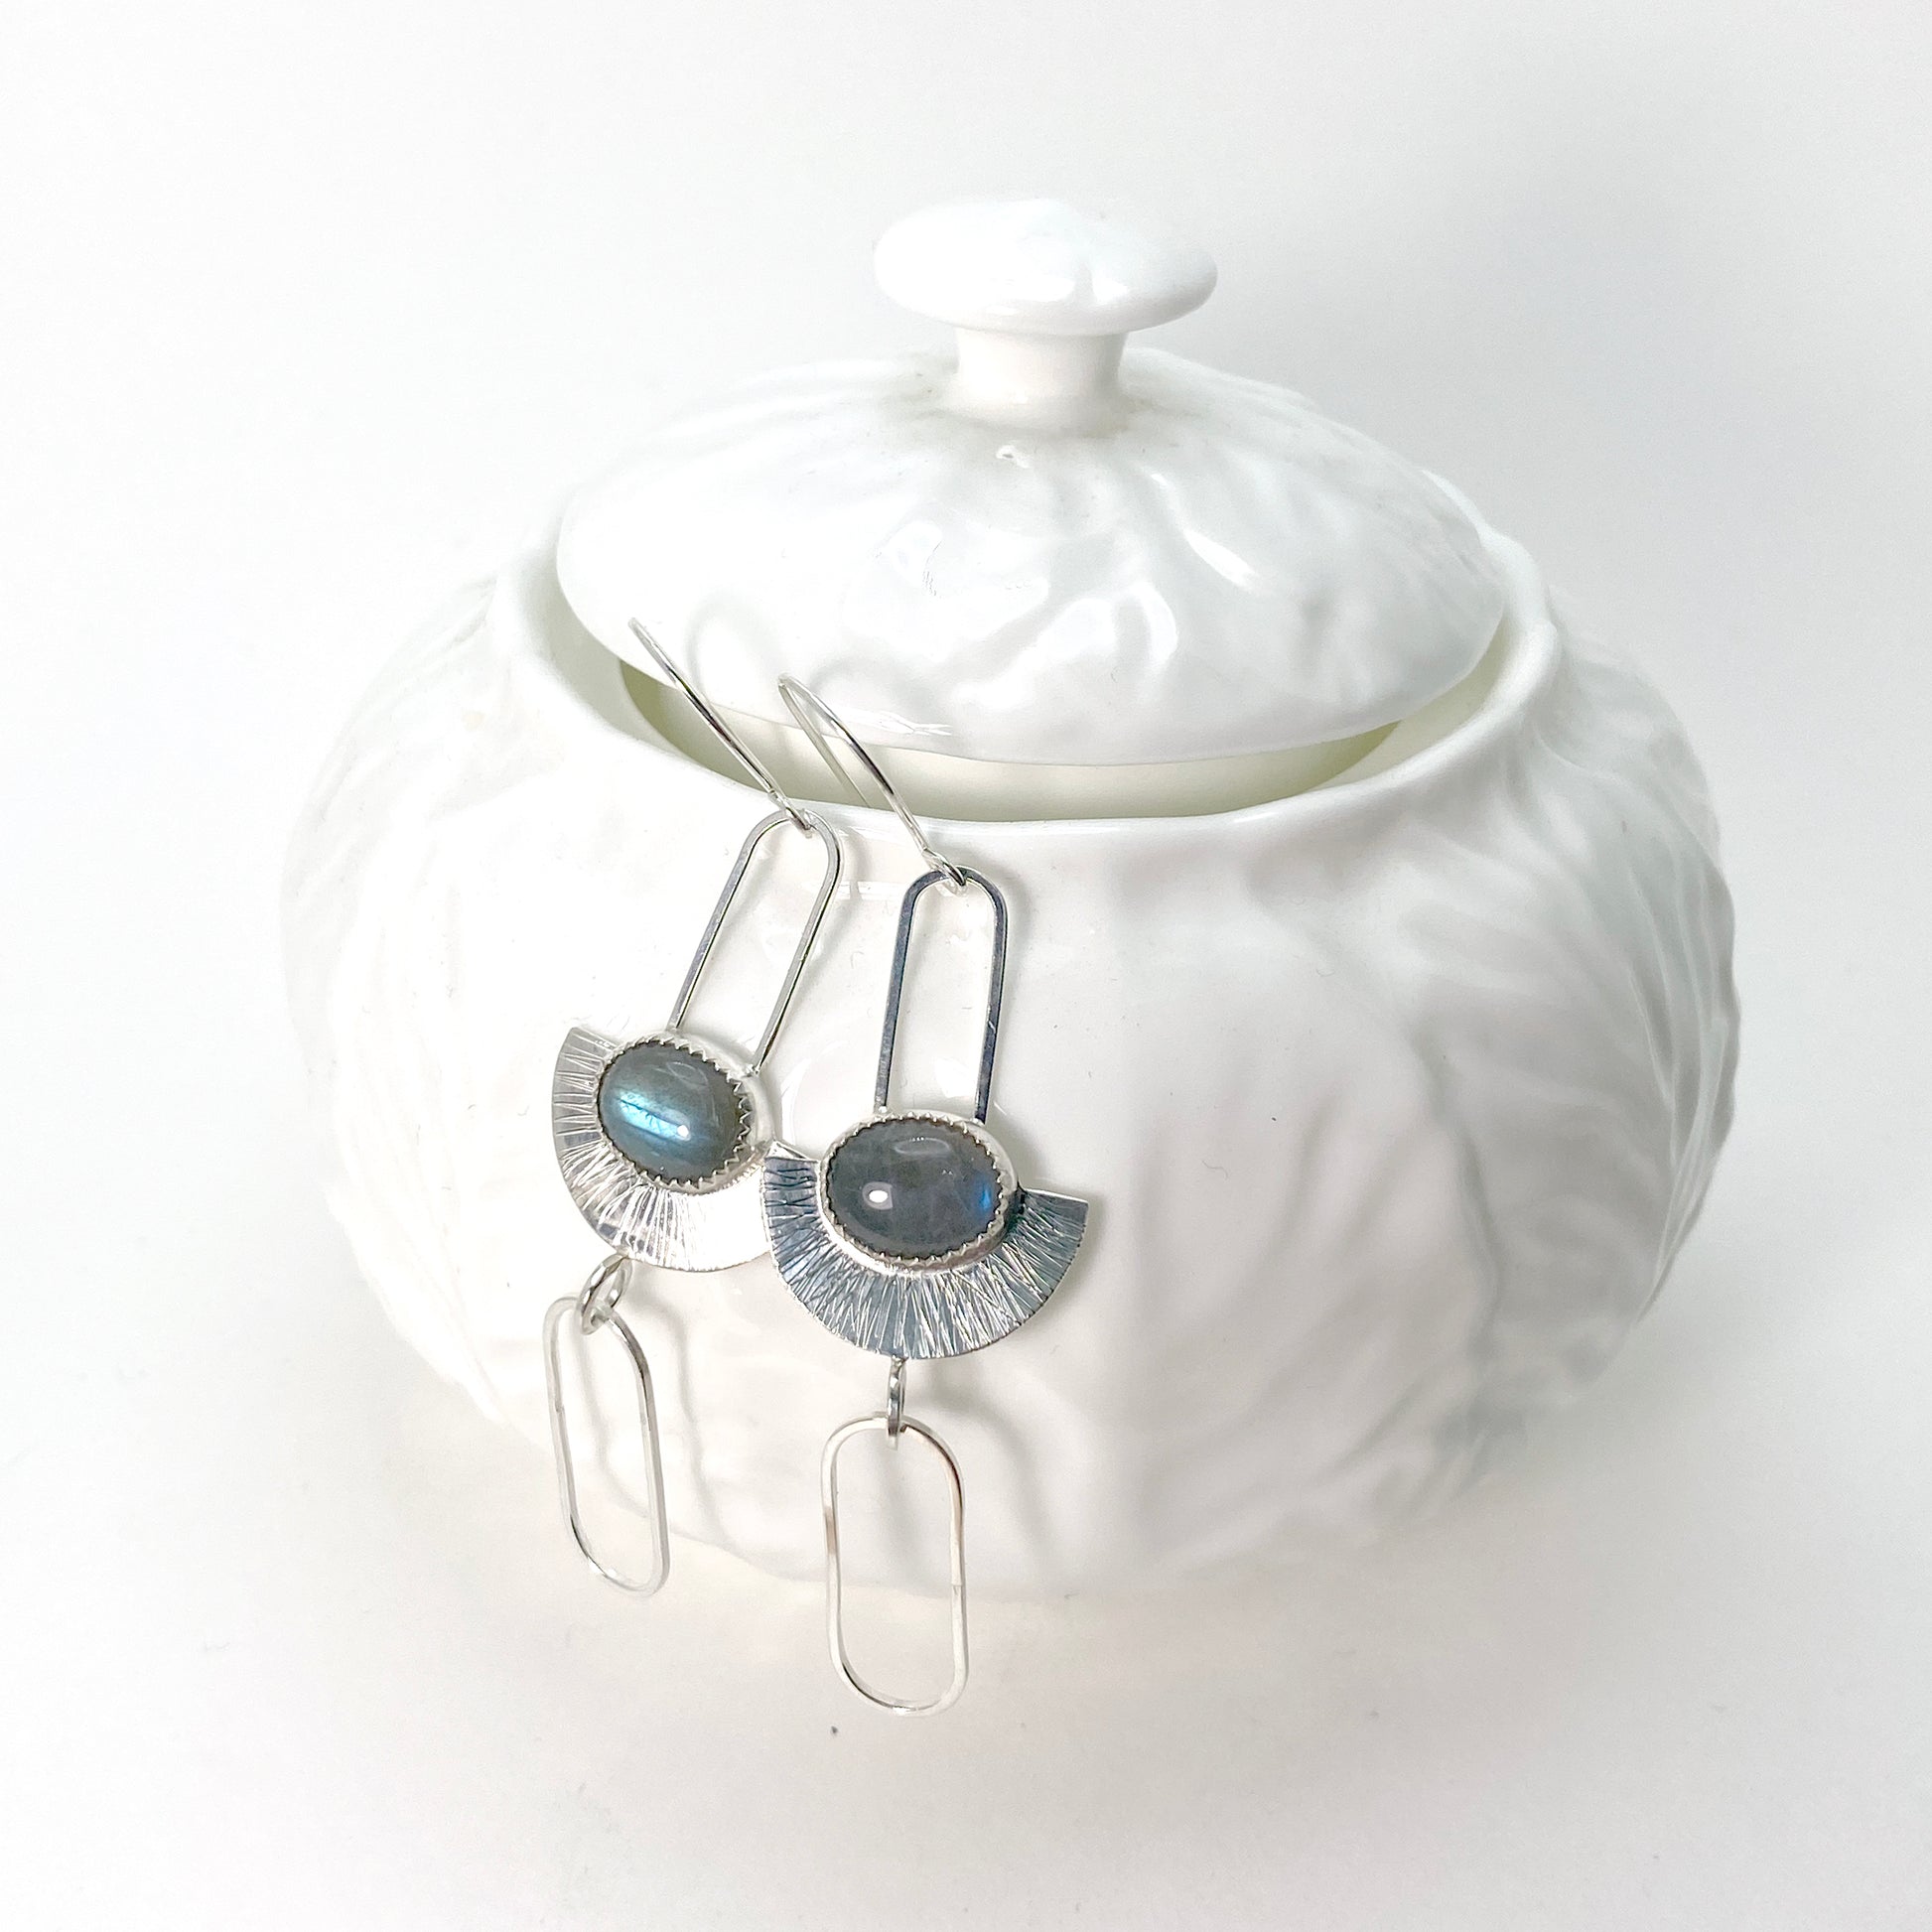 Sterling silver earrings in an art-deco geometric style. An oval labradorite stone lays horizontally across a half-circle with radial lines. The half-circle is suspended from a hook by a skinny, elongated square-wire half chain link. Below the half-circle, another elongated chainlink swing freely from a jump ring.